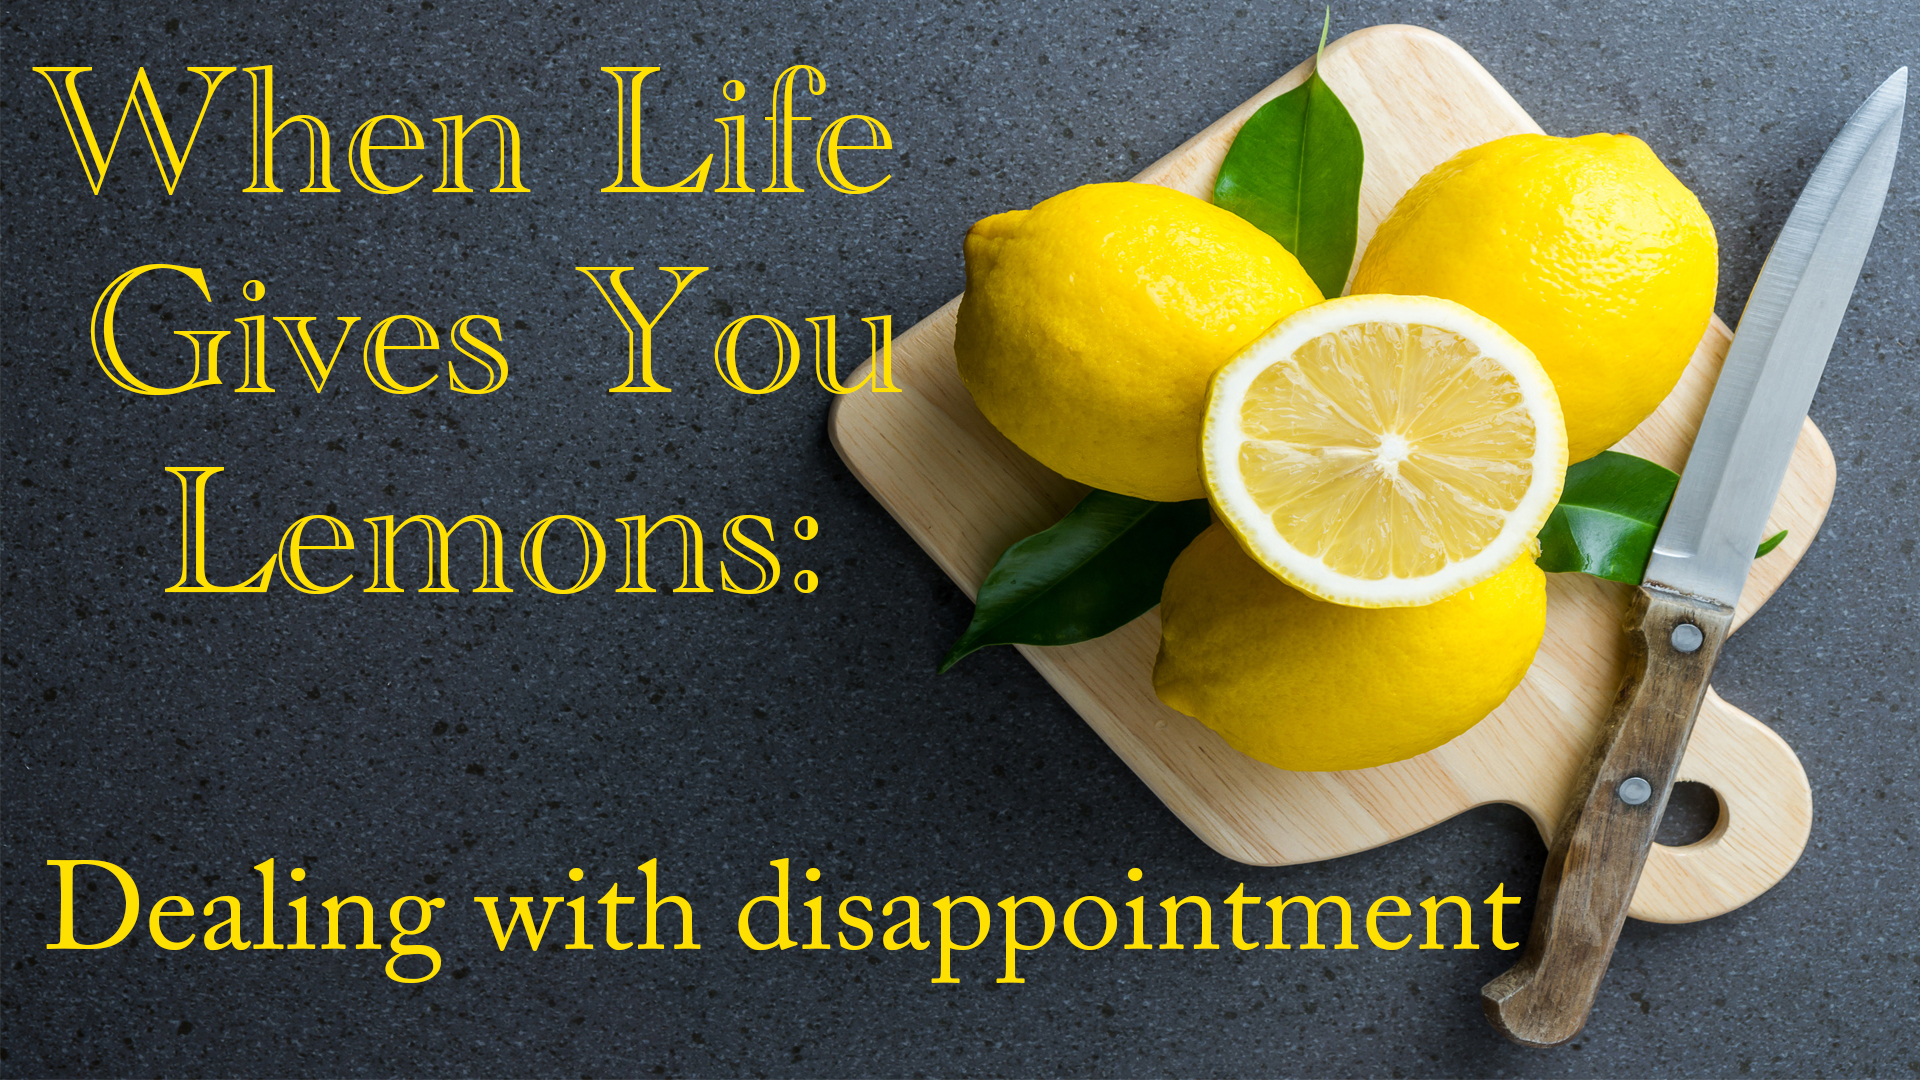 Two Causes of Disappointment ~ Part 1